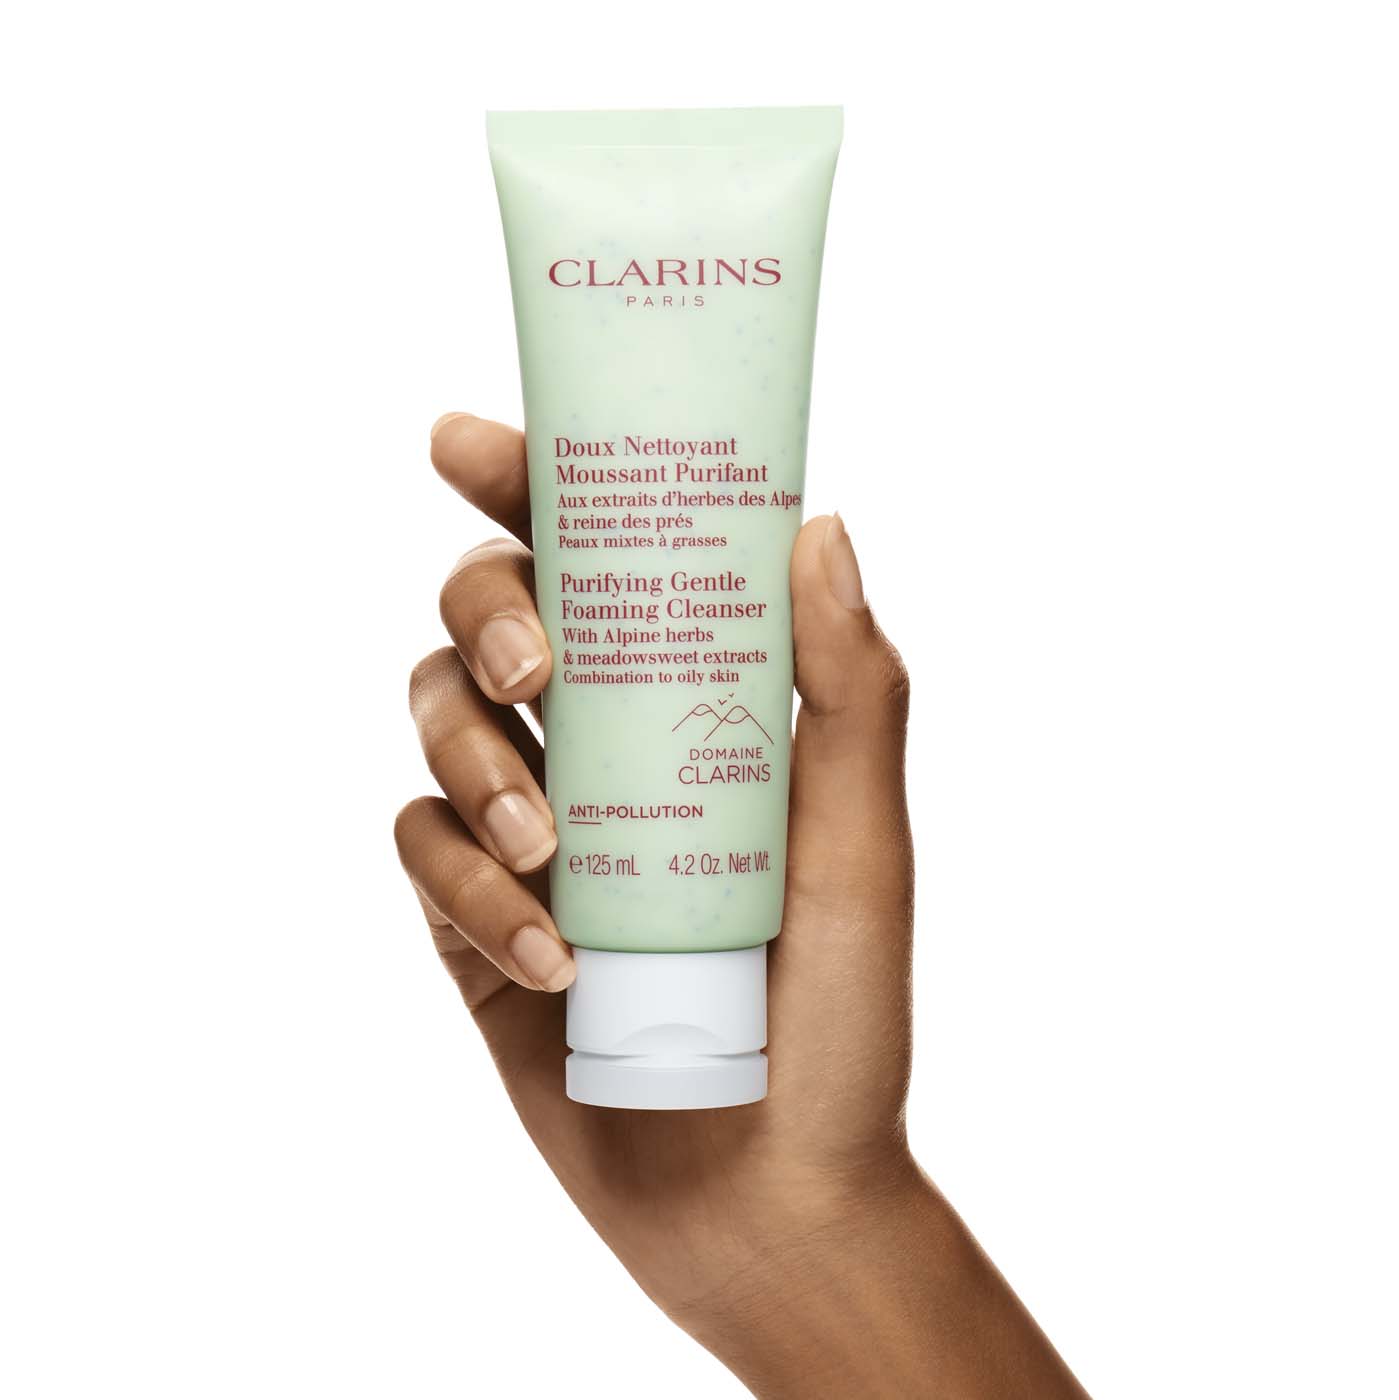 CLARINS Purifying Gentle Foaming Cleanser - Combination to Oily Skin 125mL